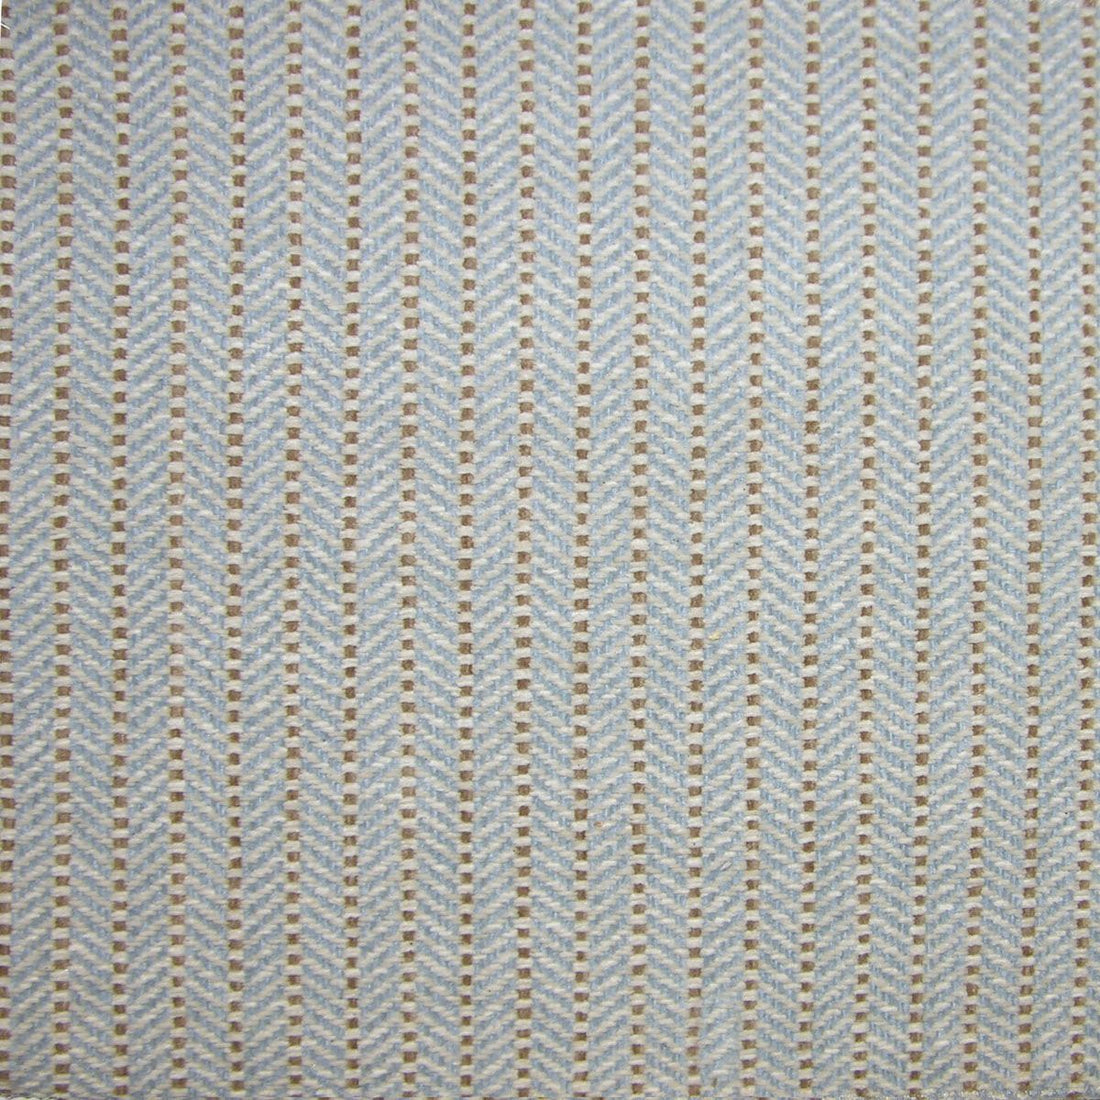 Cadogan Stripe fabric in blue tan color - pattern number LW 00012945 - by Scalamandre in the Old World Weavers collection